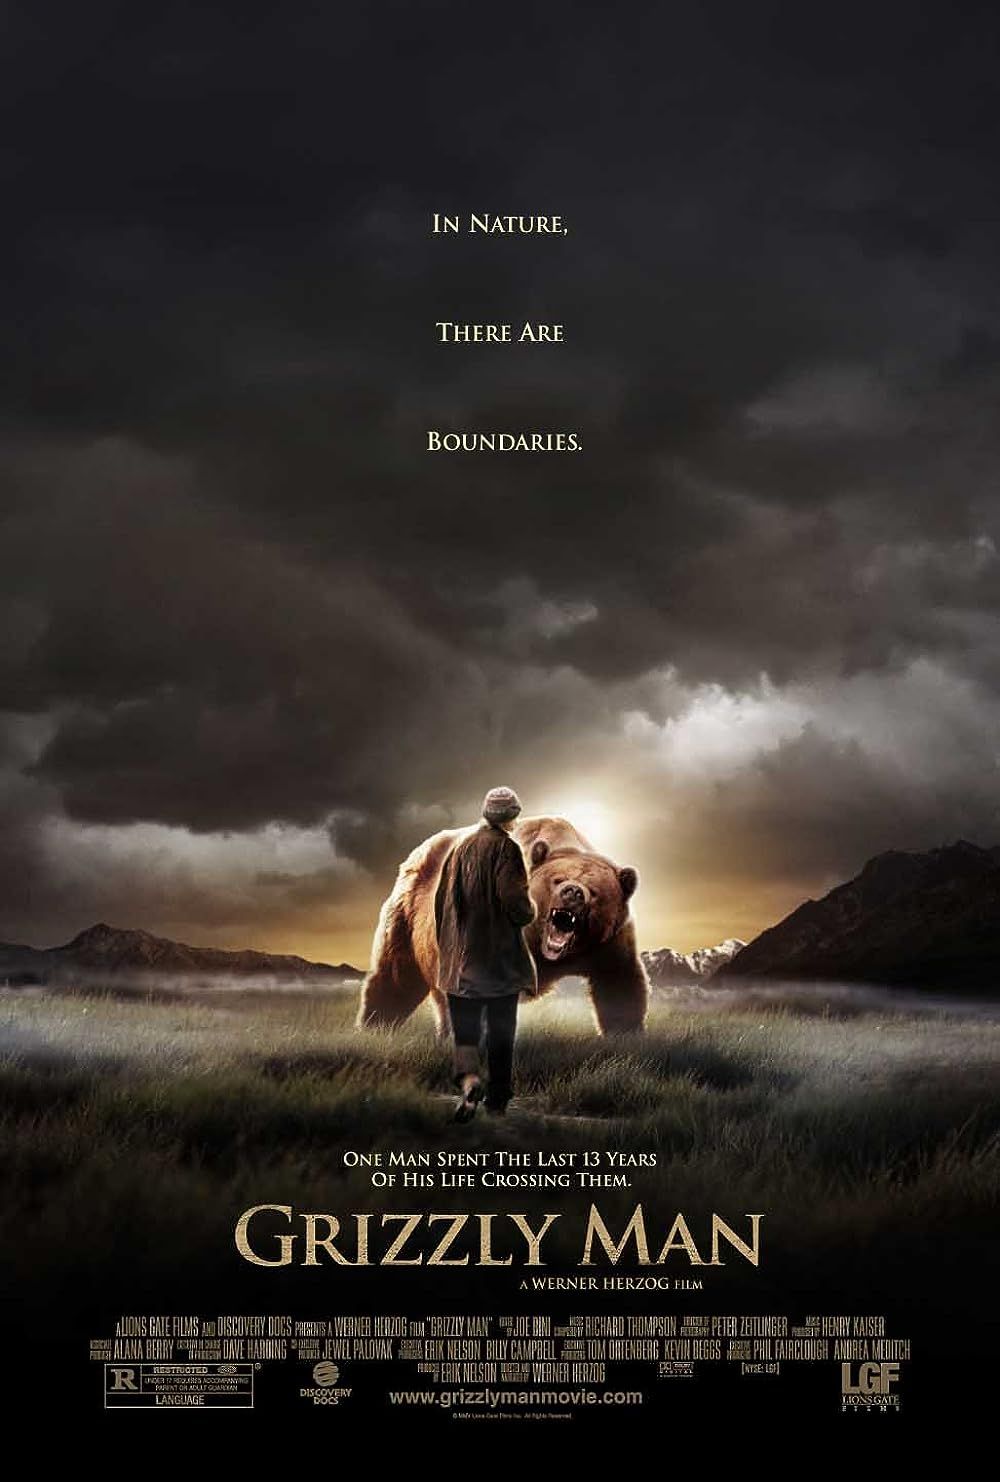 the 2005 documentary Grizzly Man, where in nature there are boundaries